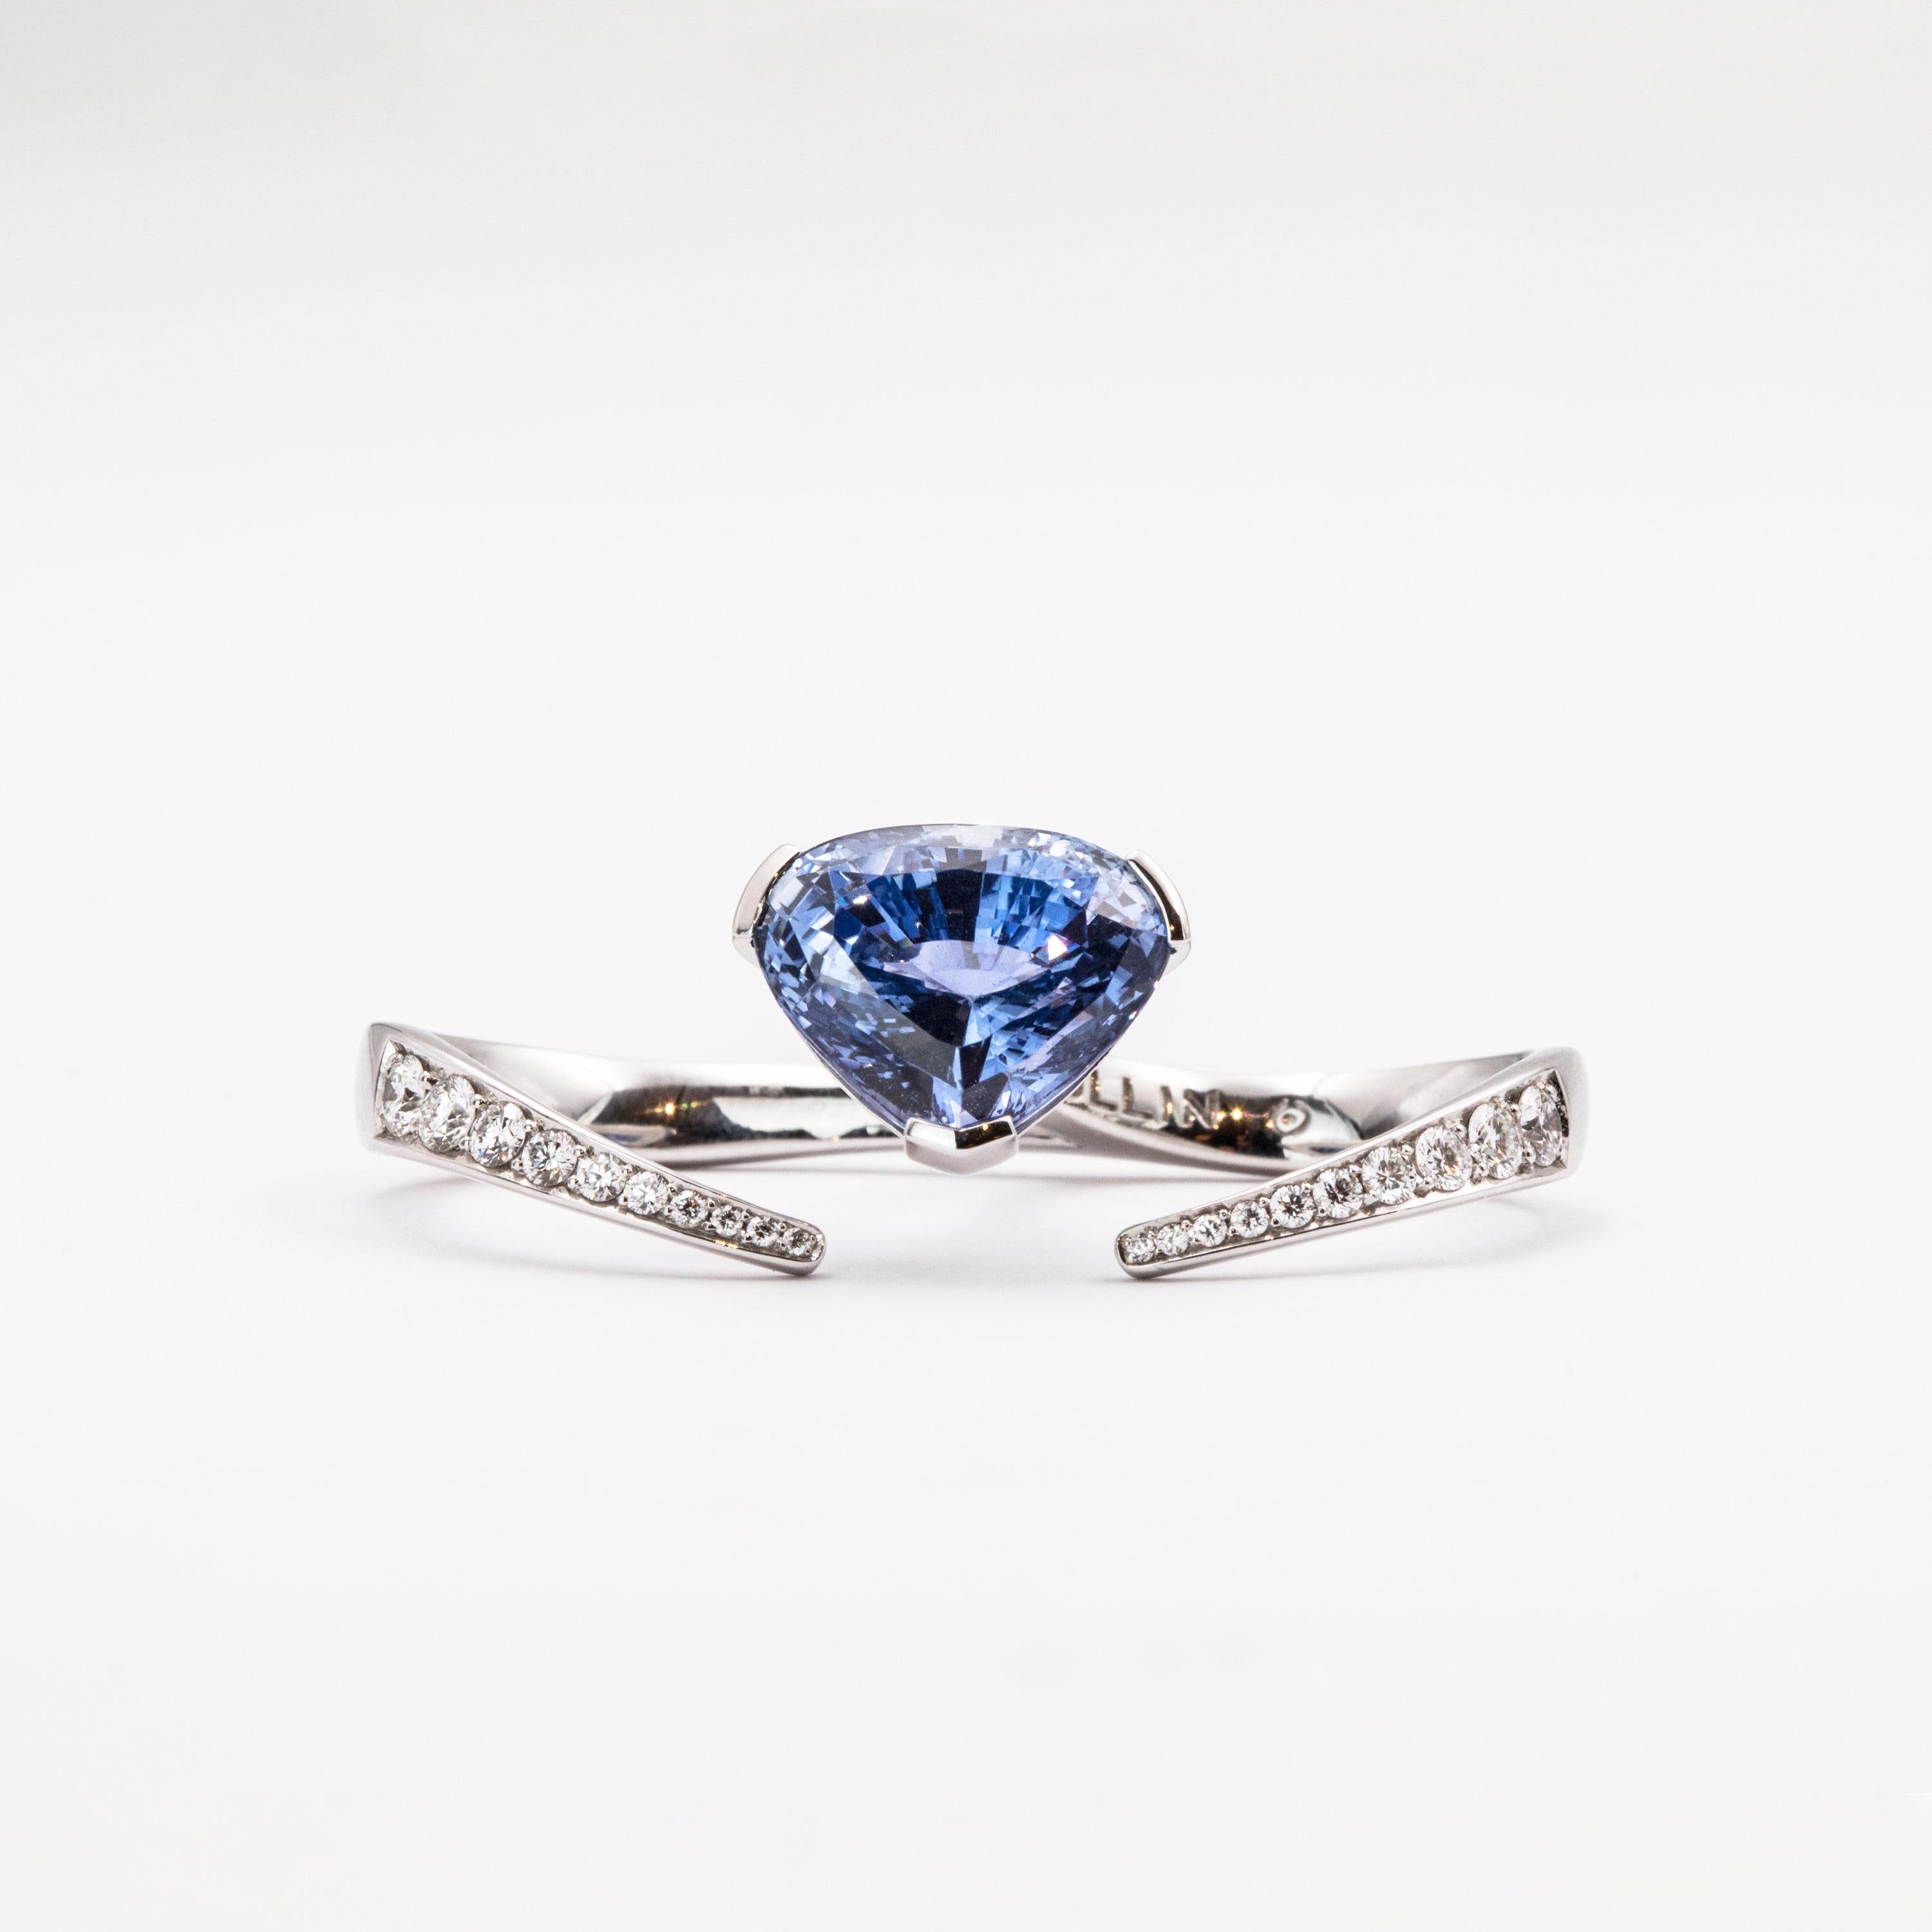 The diamond-set shank of this piece, covering the middle as well as the ring finger, features a pear-shaped blue sapphire weighing 8.97 carats. The ring bears a total of 0.49 carat white diamonds (F / VVS) and is hand-crafted in 18 carat white gold.